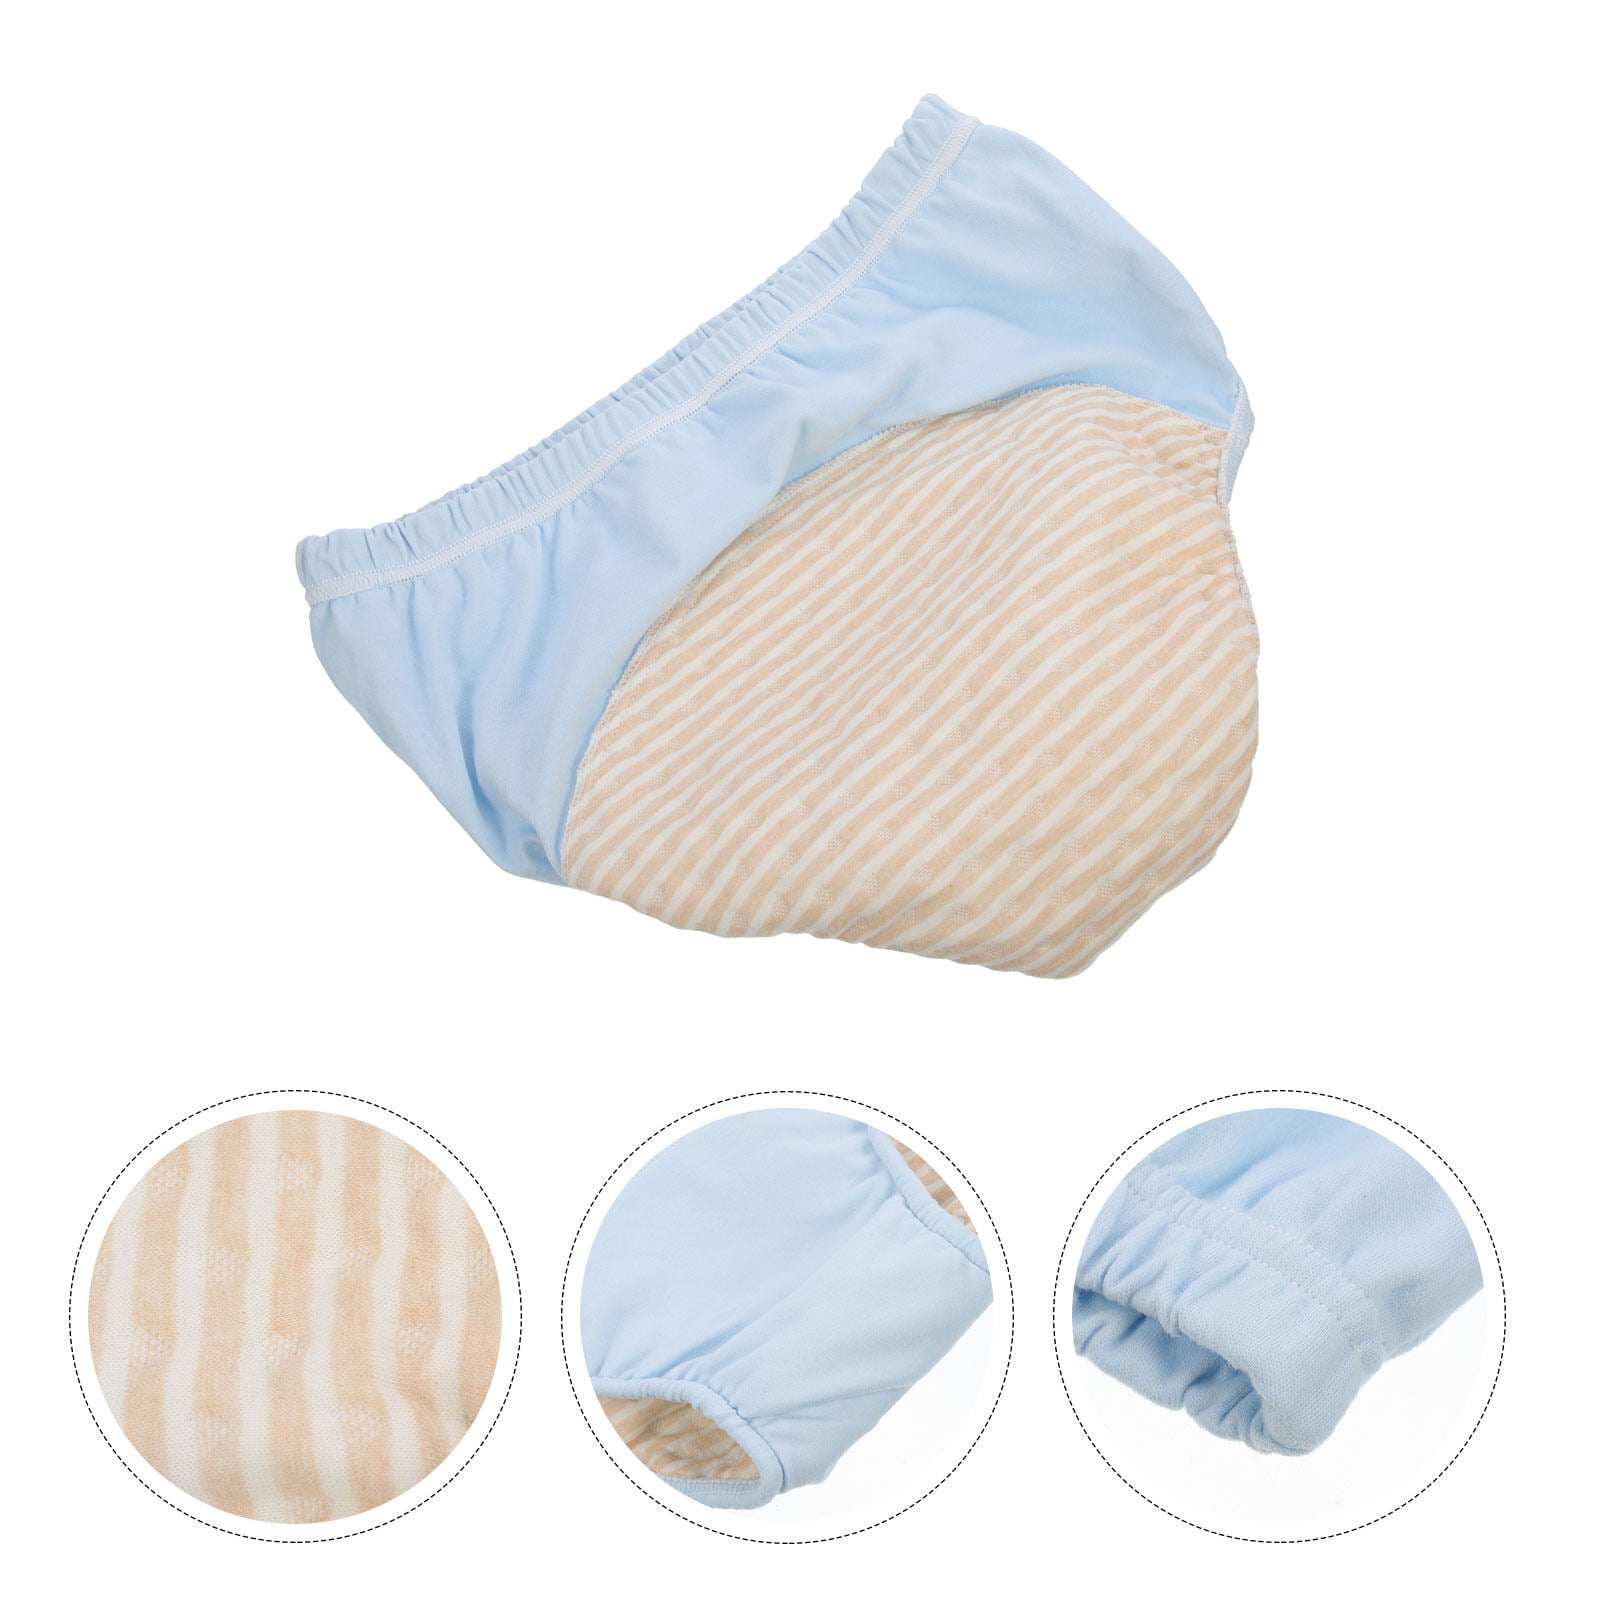 Elderly Incontinence Underwear Cloth Diaper Water-washable Leak-proof  Cotton Briefs For Adult Accidents Adult - Adult Diapers & Travel Devices -  AliExpress